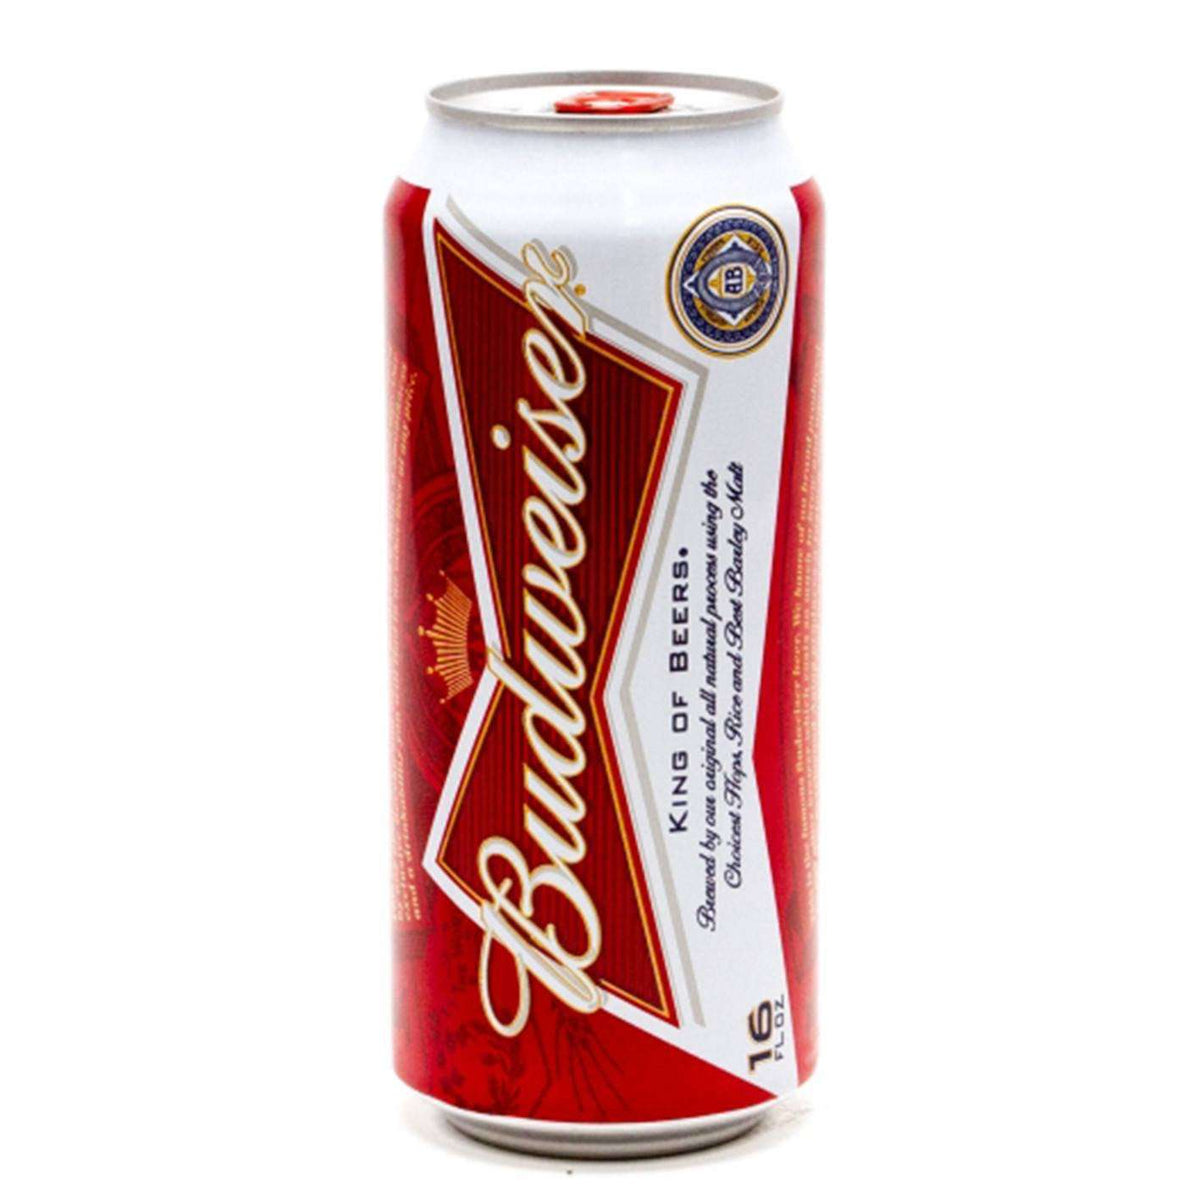 24-hour-budweiser-beers-delivered-all-night-bud-beer-delivery-booze-up